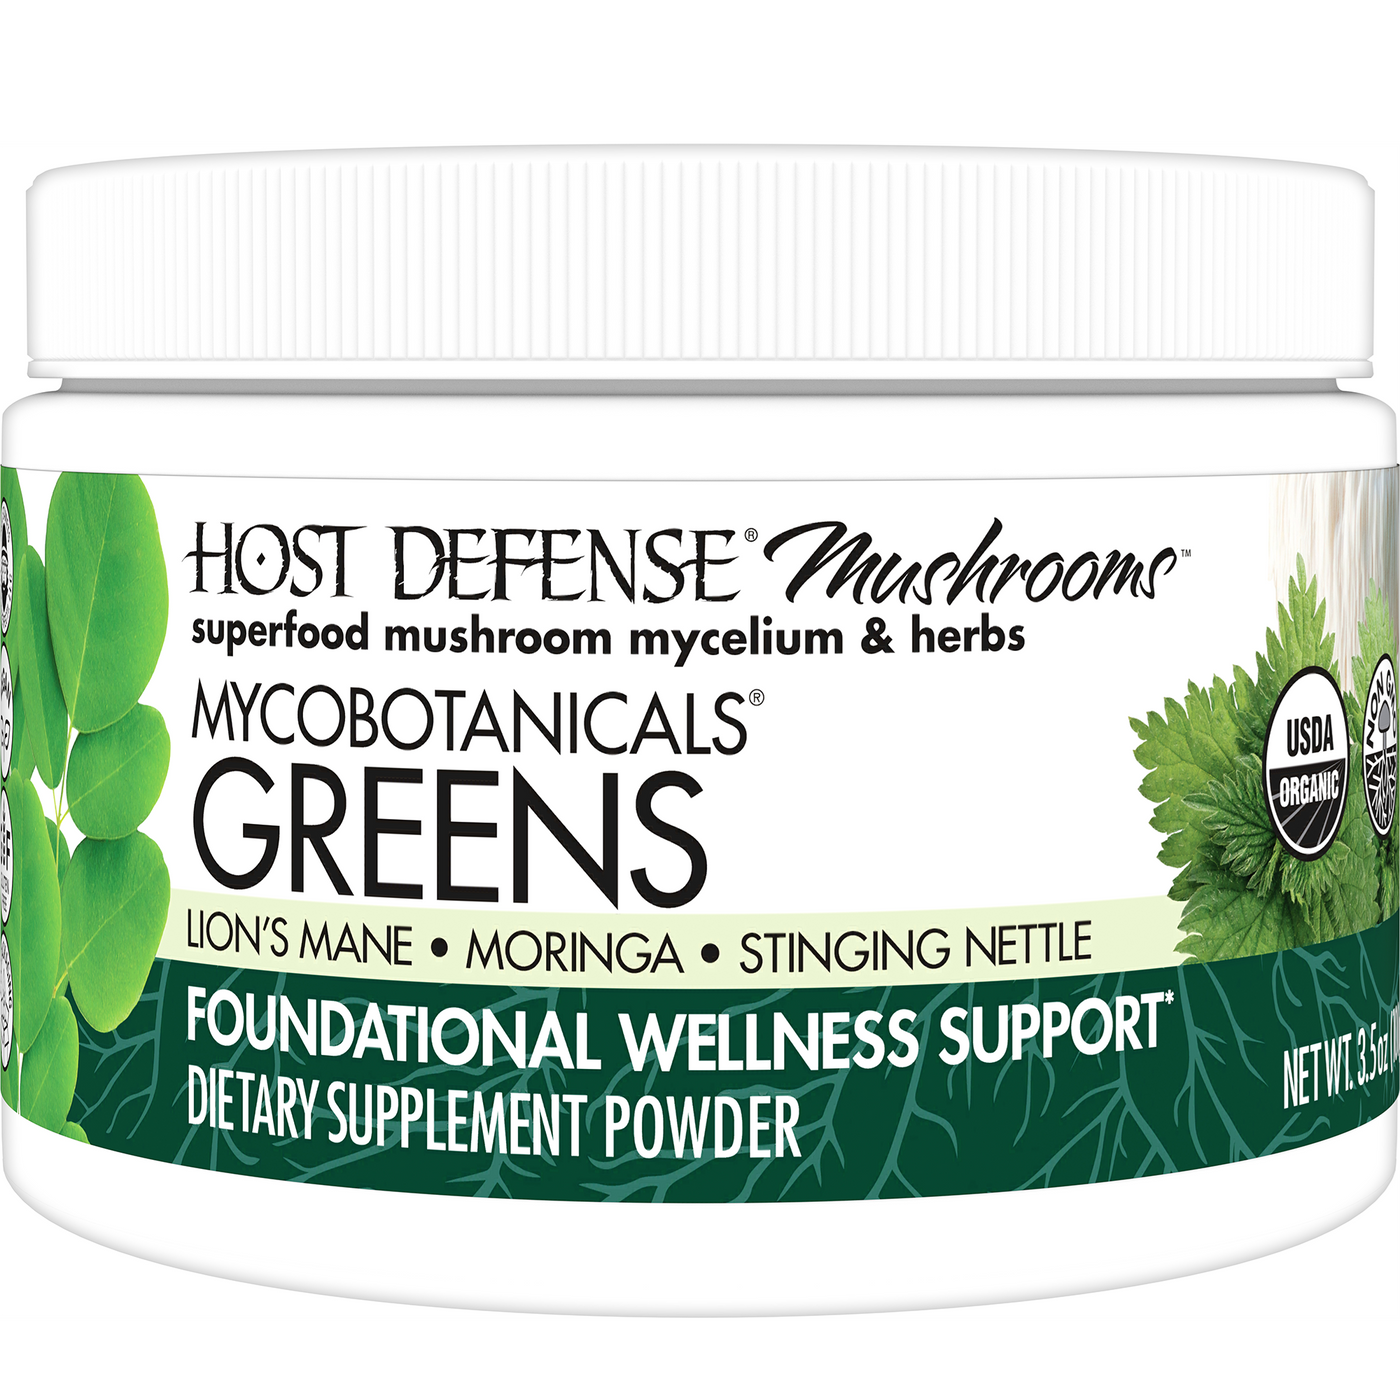 Greens Powder ings Curated Wellness